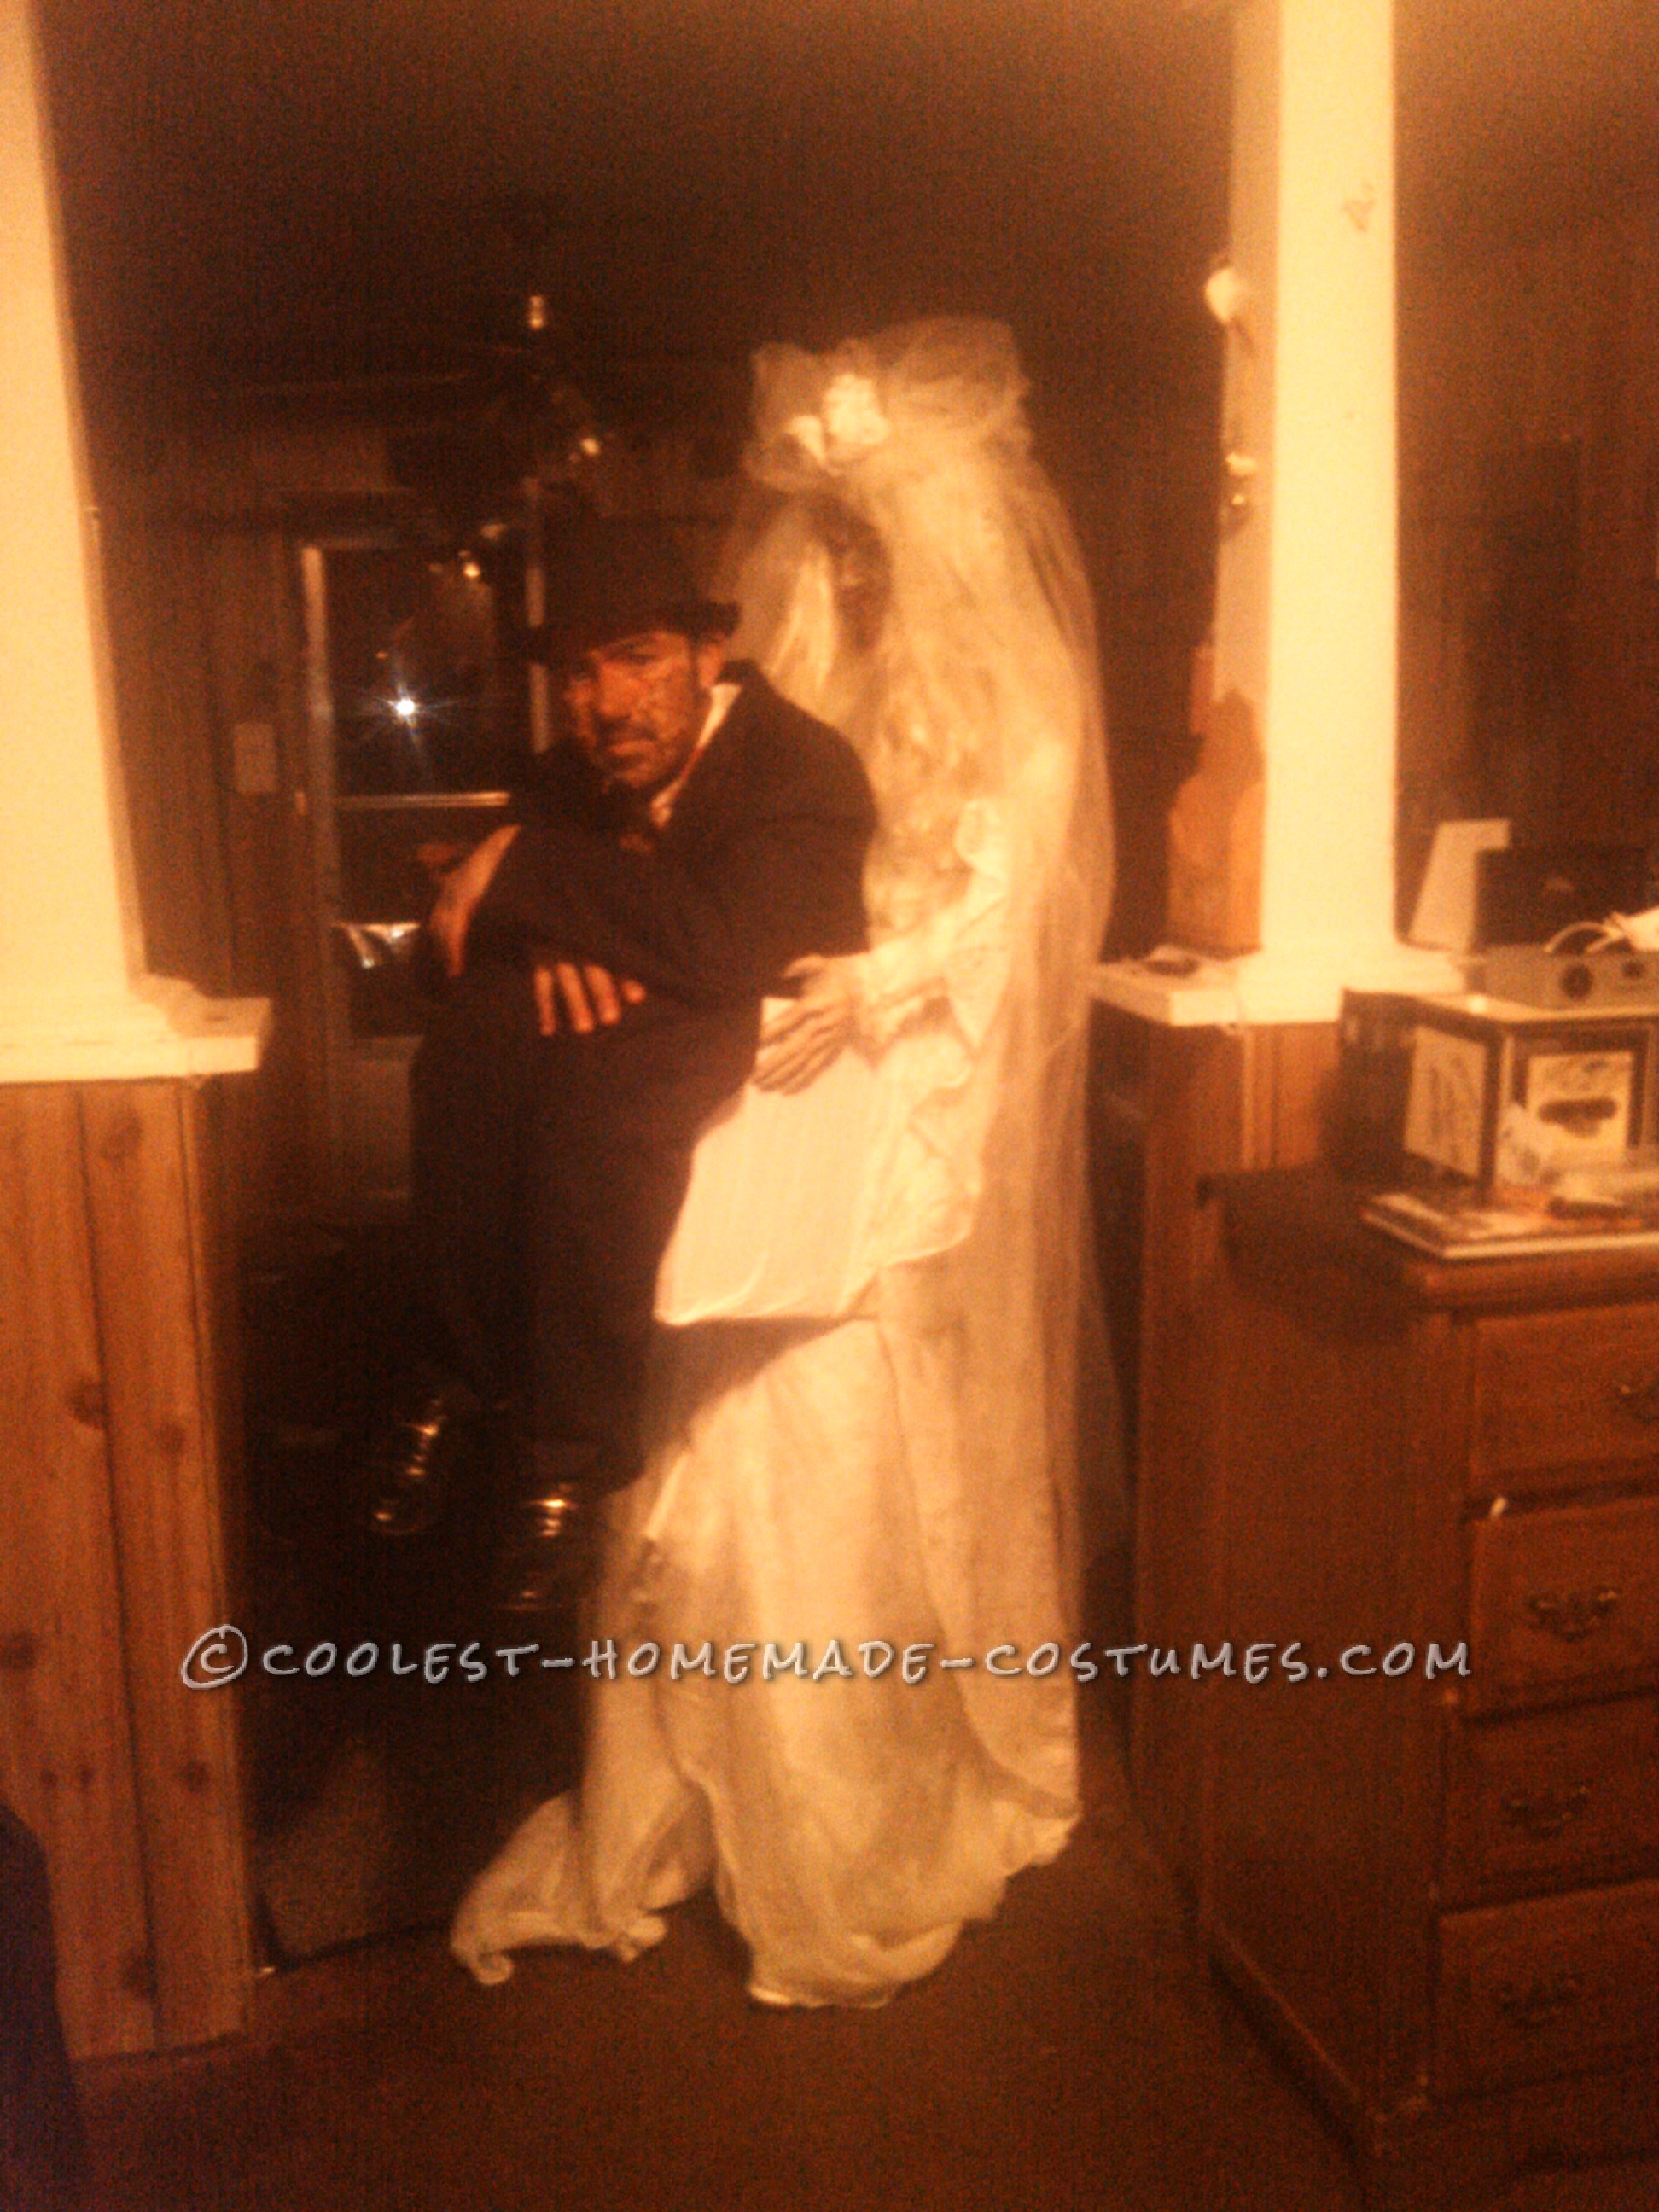 Dead Bride Carrying a Dead Groom in a Box Optical Illusion Costume